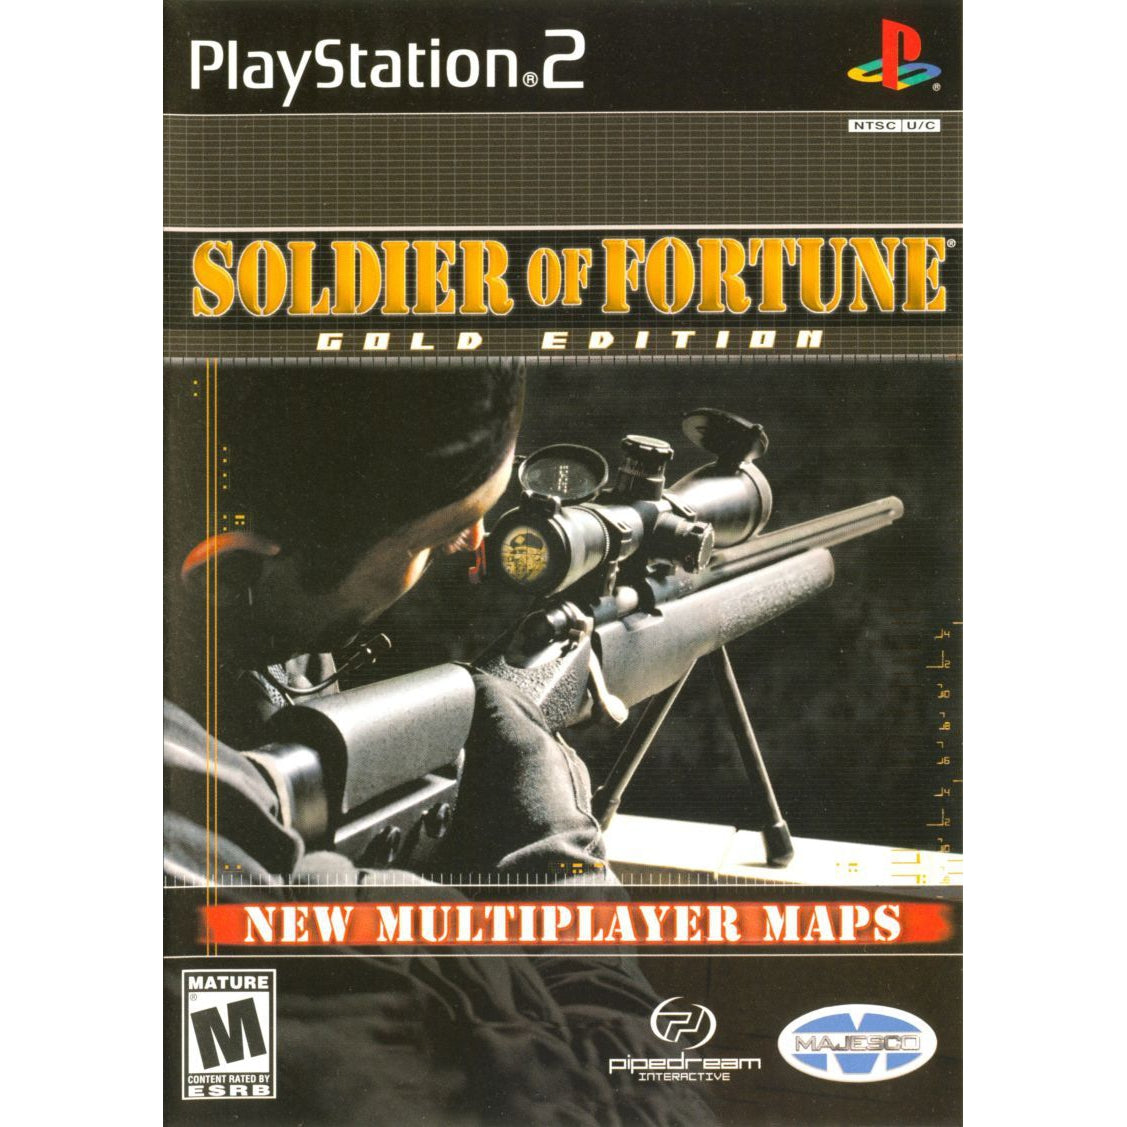 Soldier of Fortune: Gold Edition - PlayStation 2 (PS2) Game Complete - YourGamingShop.com - Buy, Sell, Trade Video Games Online. 120 Day Warranty. Satisfaction Guaranteed.